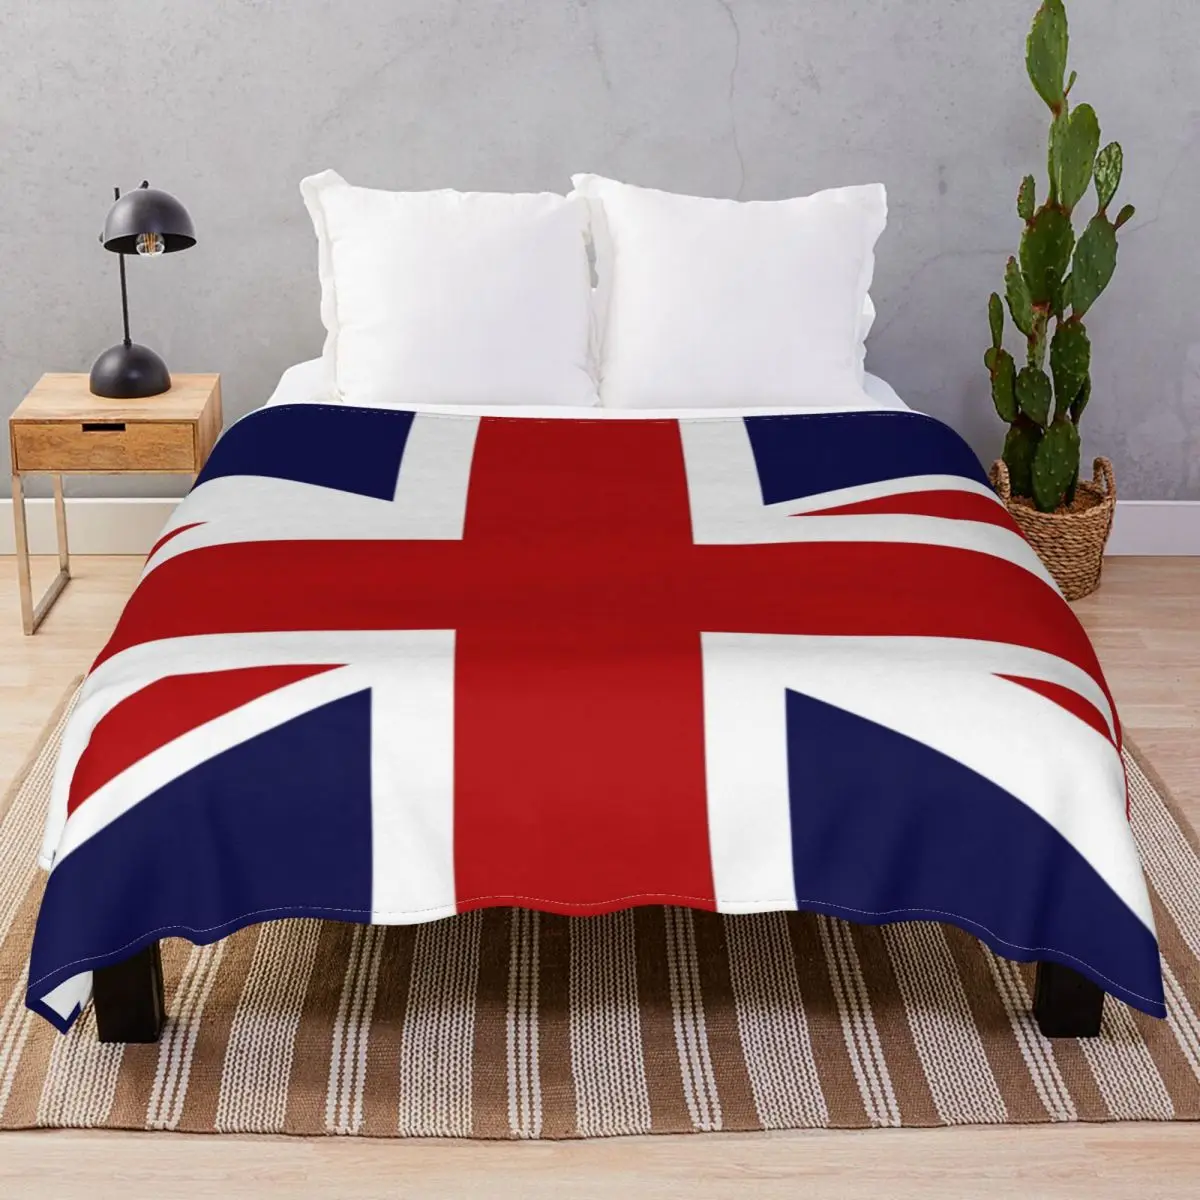 Union Jack Flag Of The UK Blanket Fleece Decoration Lightweight Unisex Throw Blankets for Bed Home Couch Travel Office